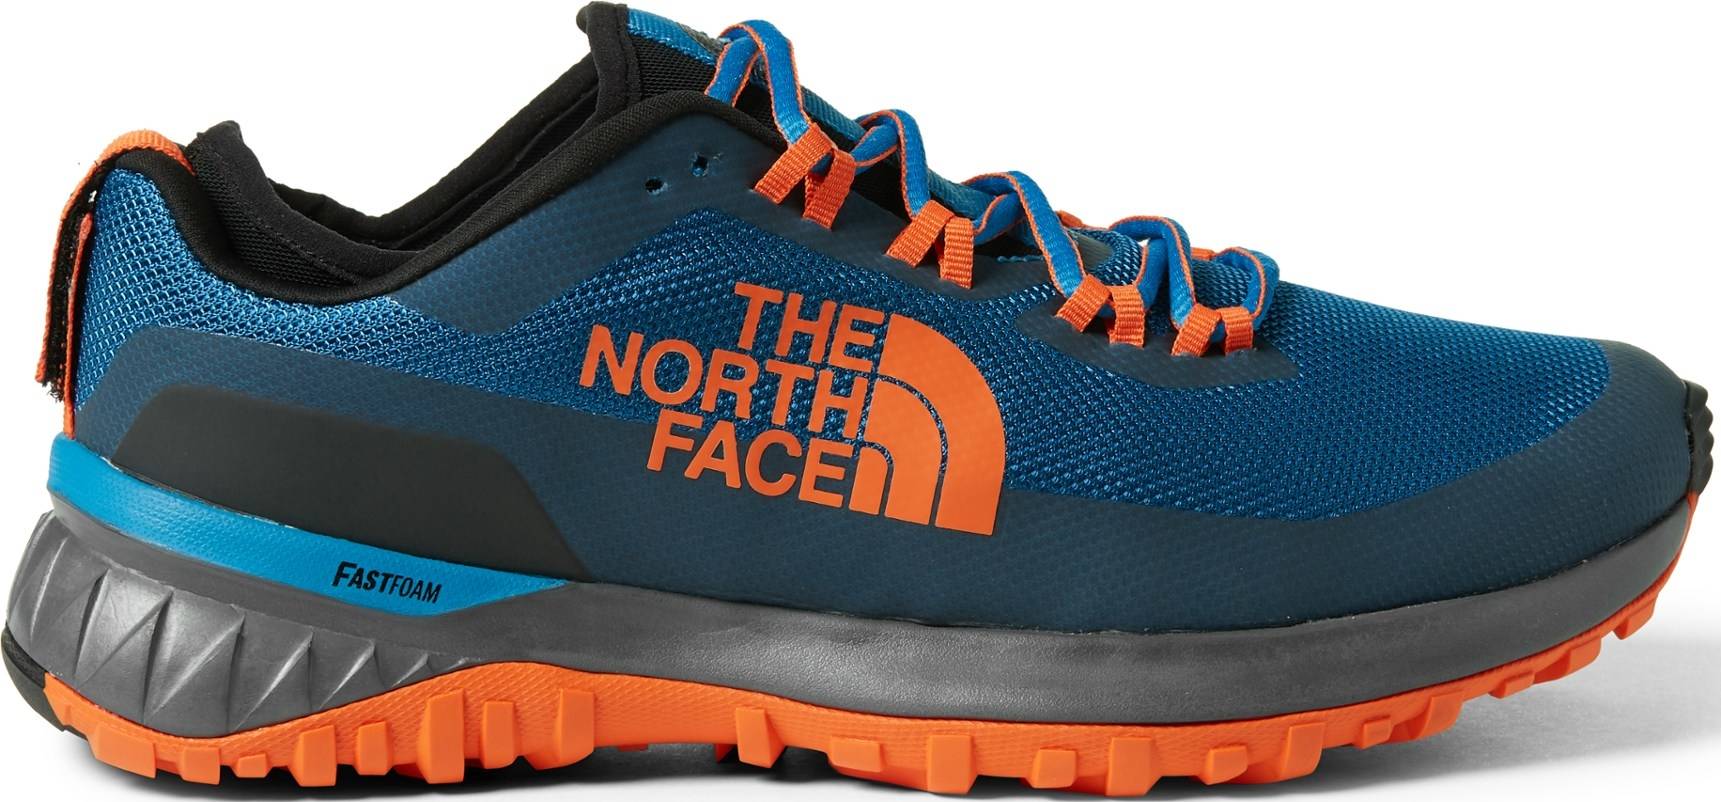 the north face men's running shoes